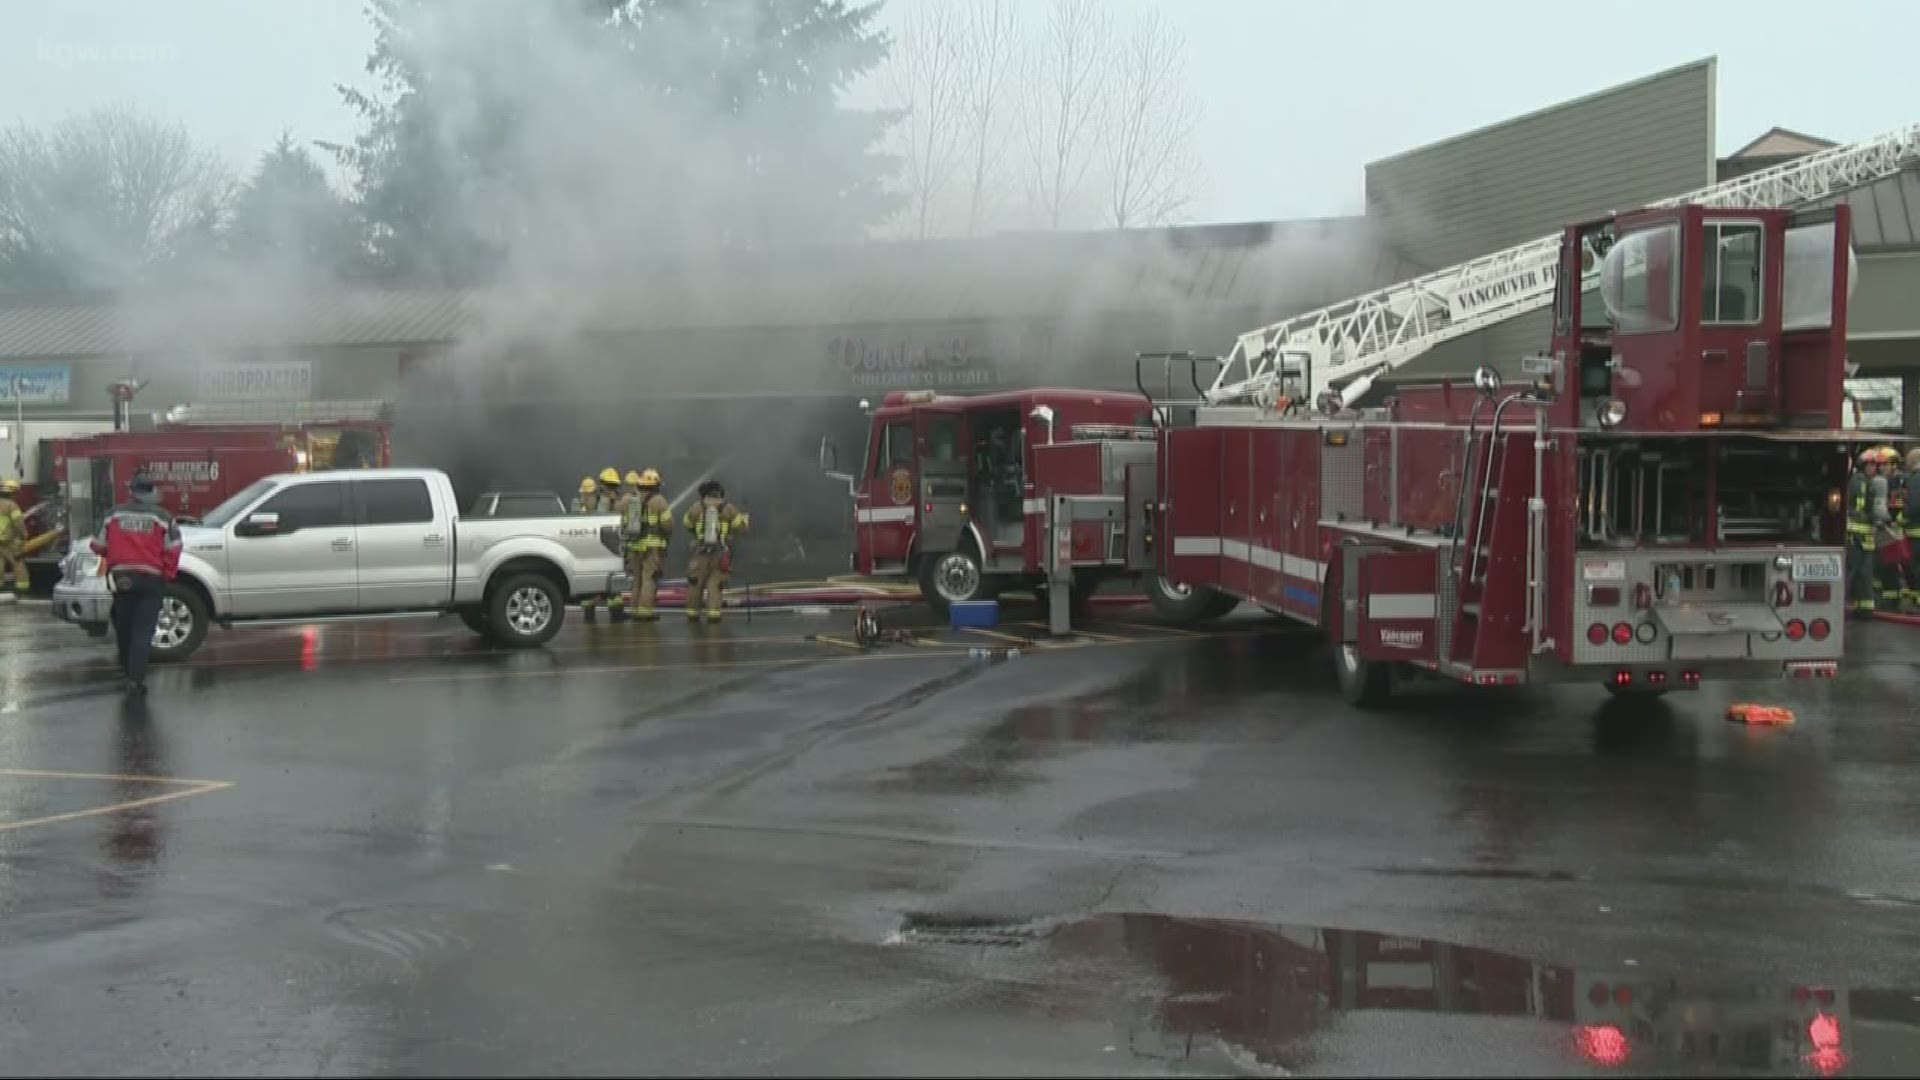 Fire destroys several businesses in Hazel Dell strip mall.